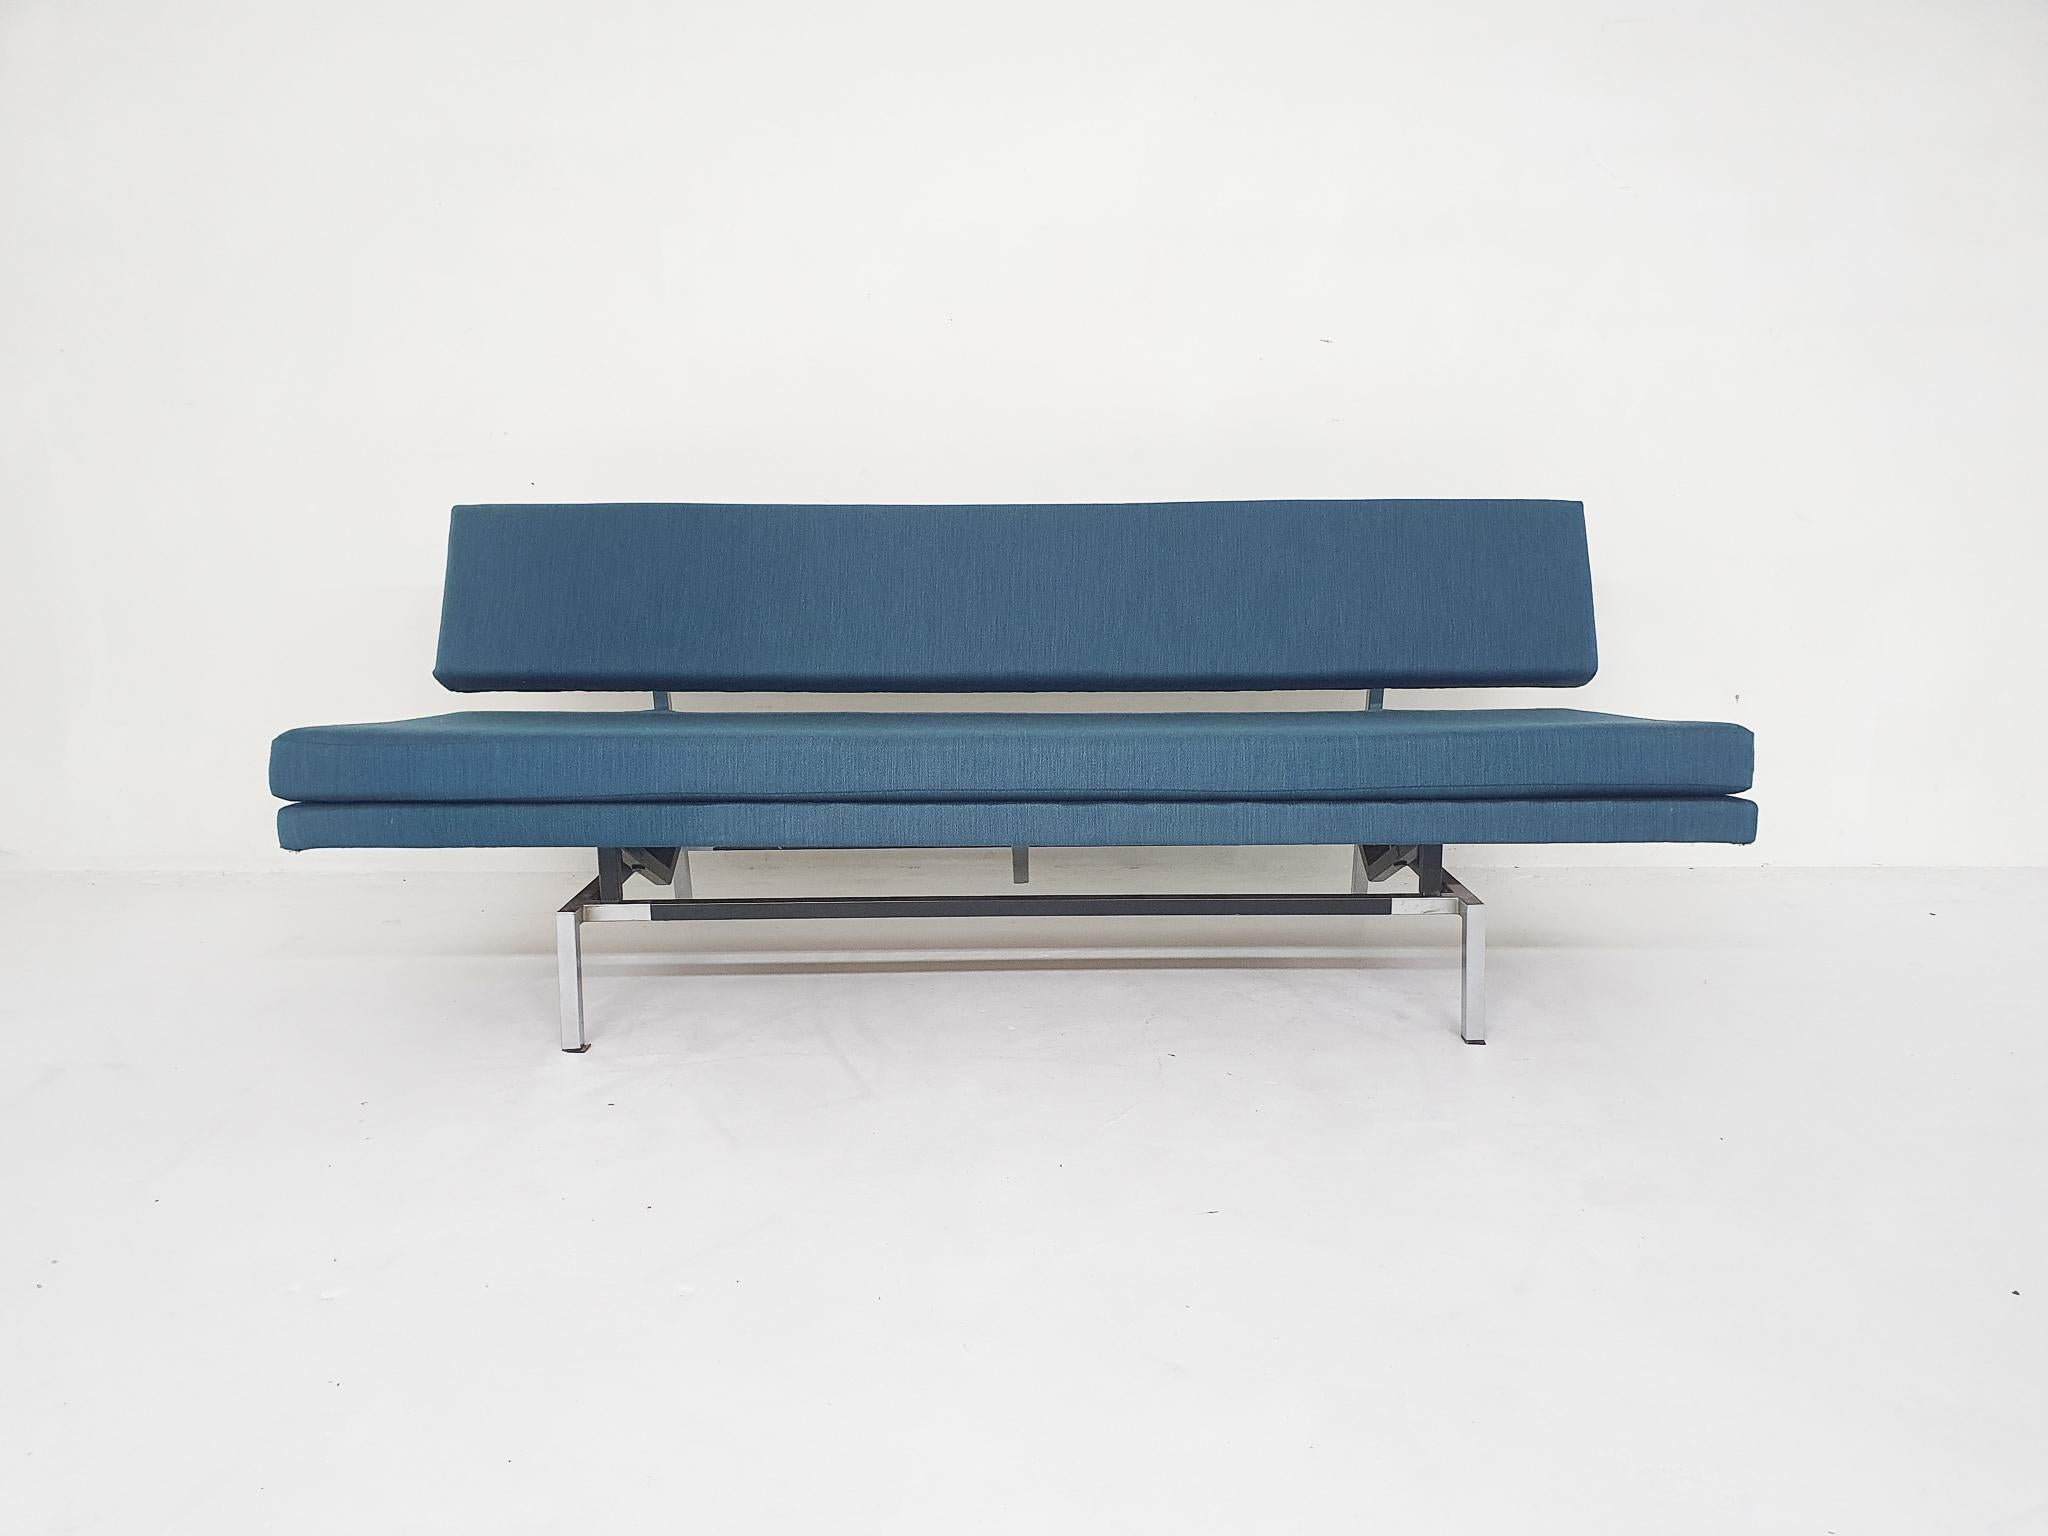 Martin Visser BR02 sofa that can be transformed into a daybed of 70 x 190 cm, by pulling the seating to the front. This is the first edition with a square frame.

Visser designed this sofa in 1958 when he was working for Dutch furniture manufacturer